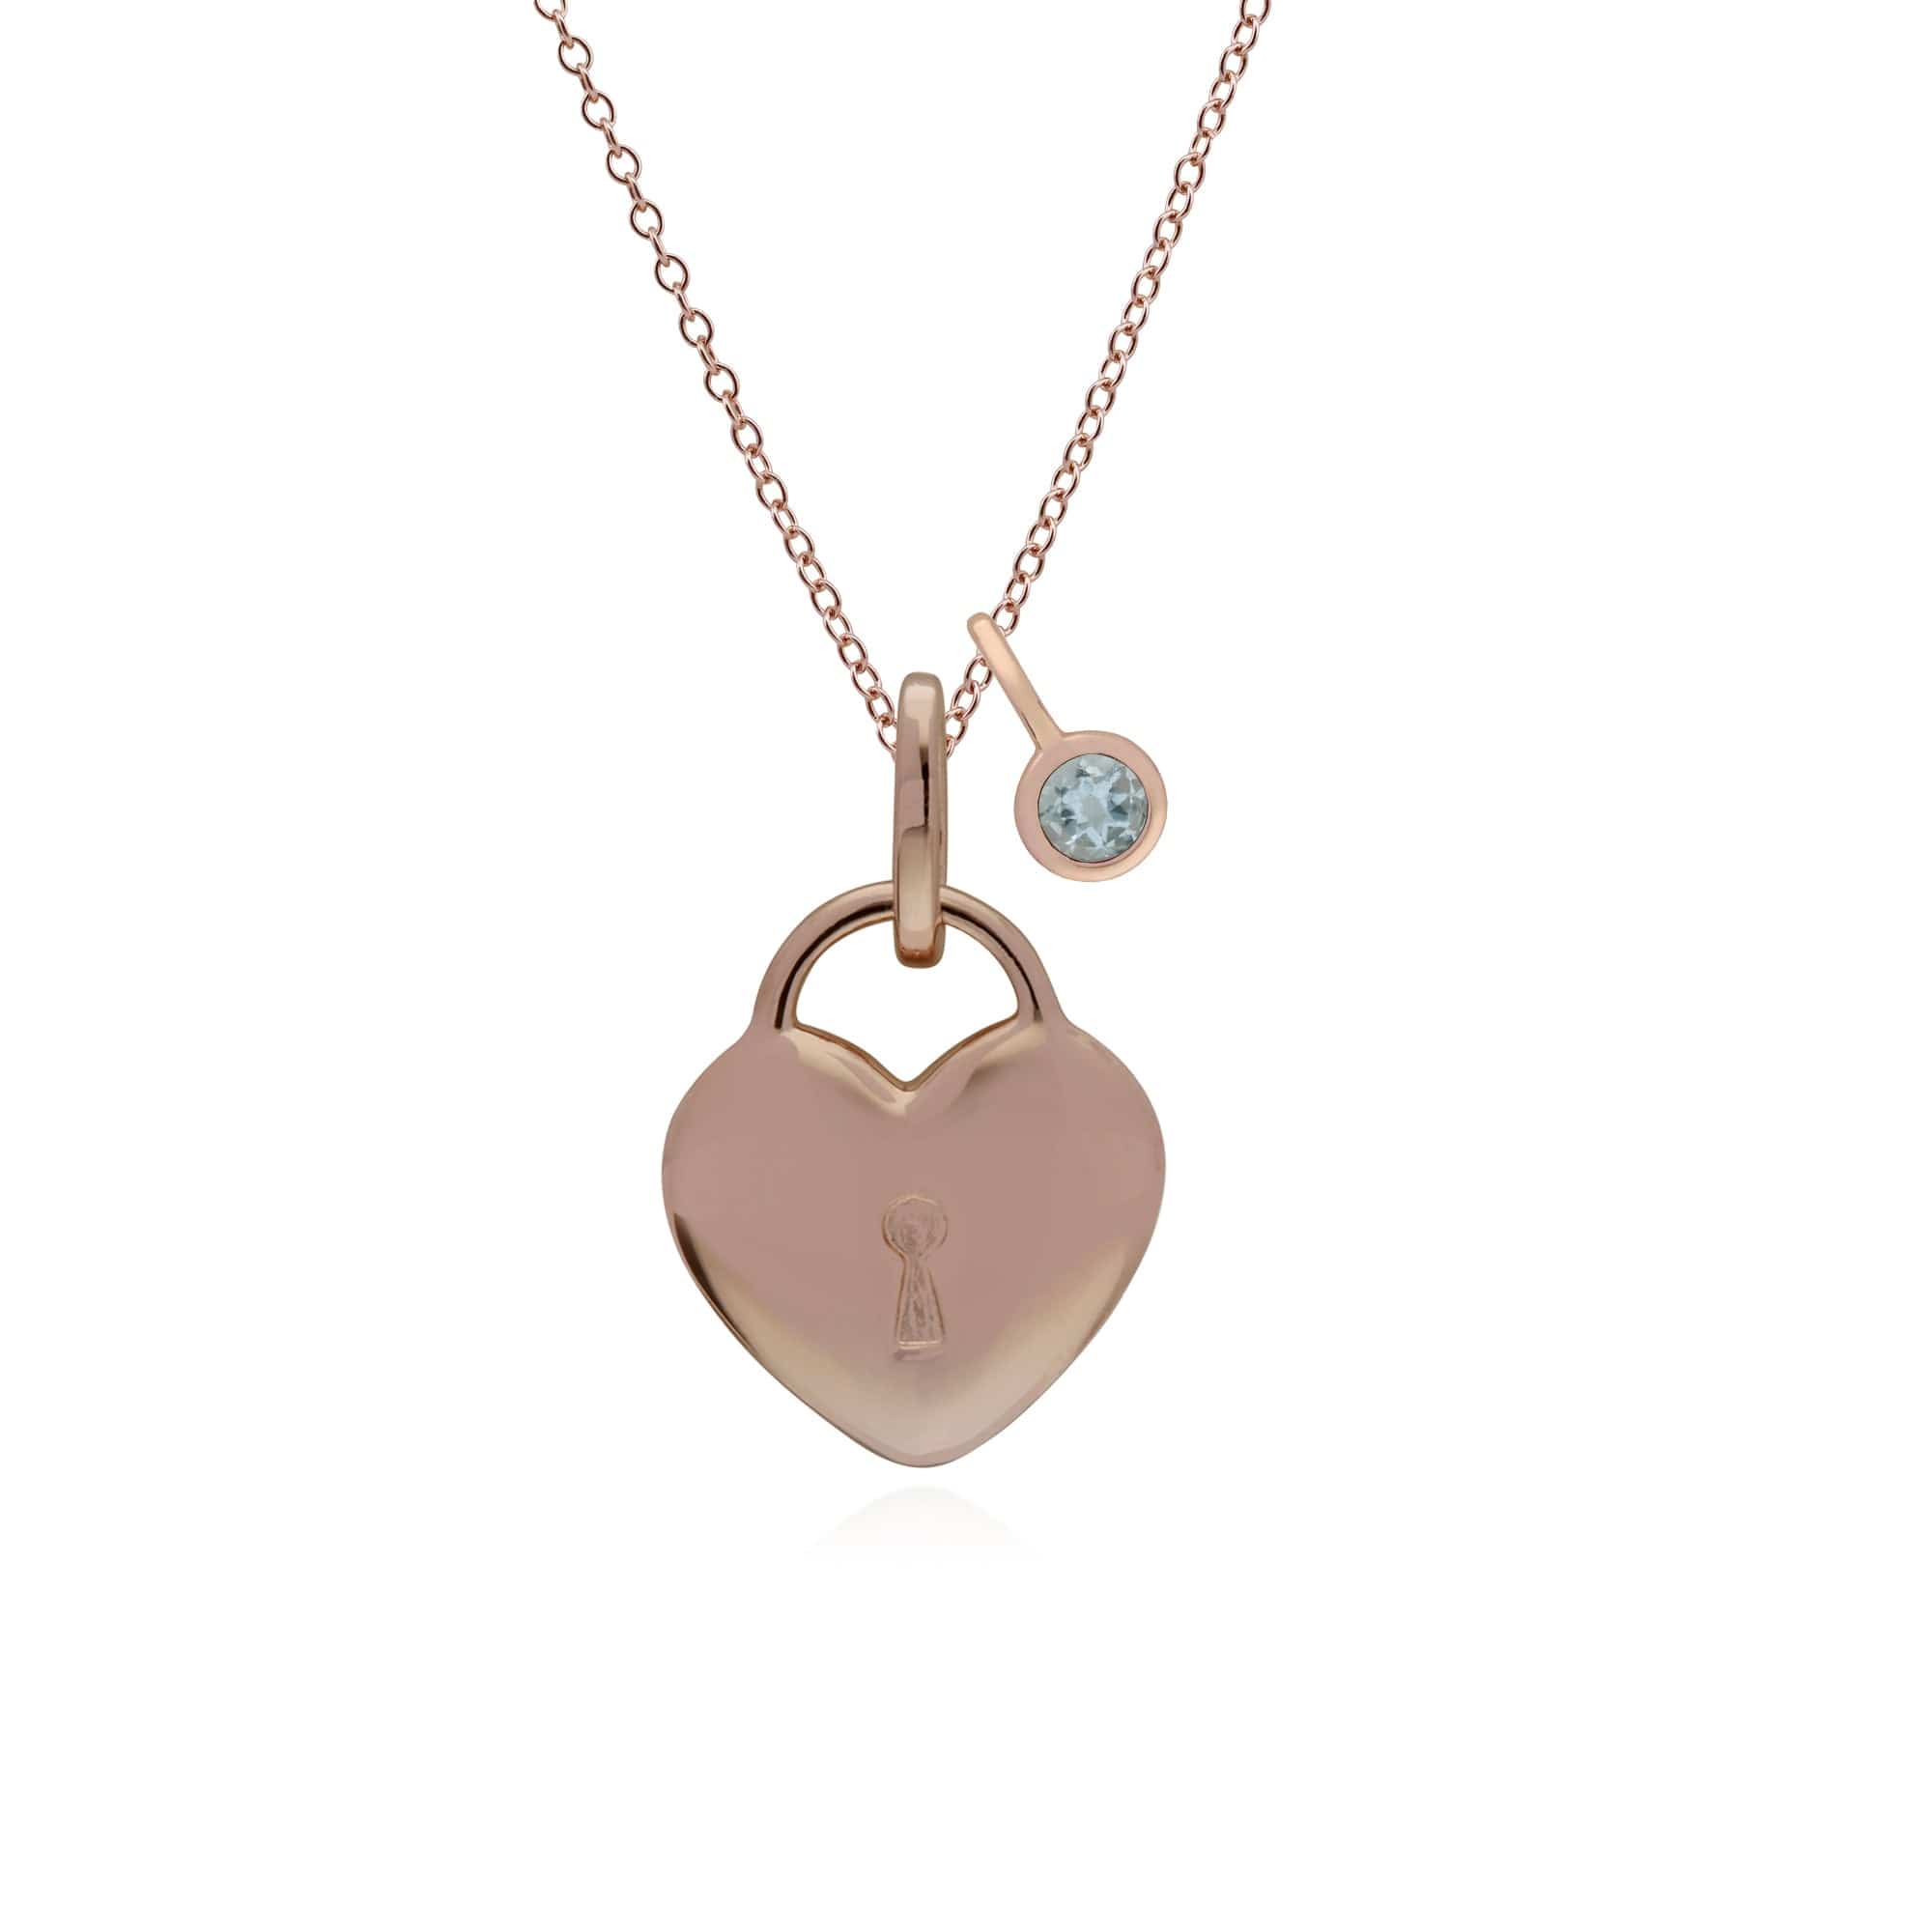 270P027307925-270P026901925 Classic Heart Lock Pendant & Aquamarine Charm in Rose Gold Plated 925 Sterling Silver 1